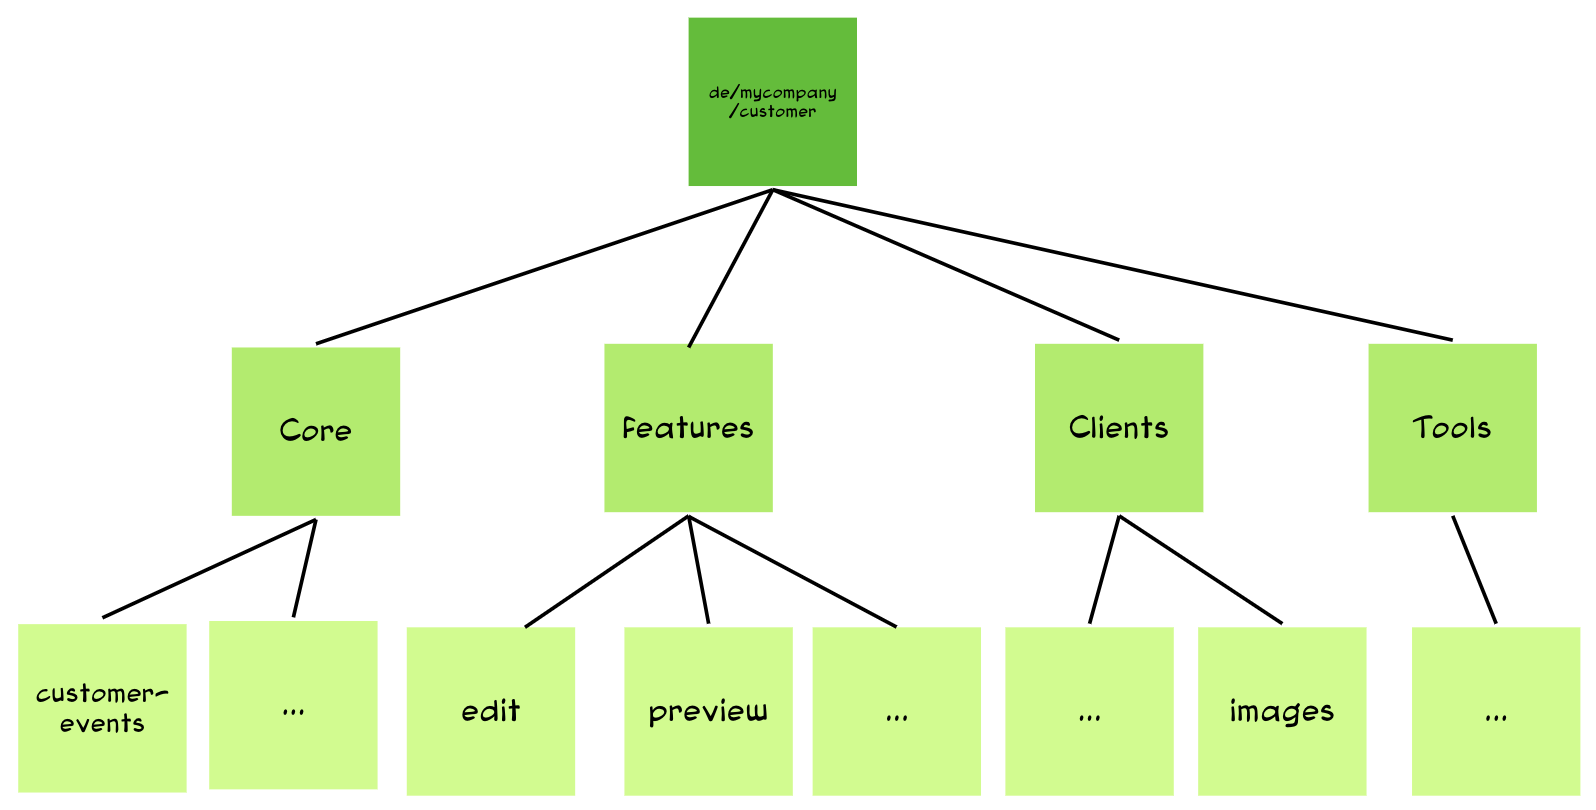 Basic structure in a hierarchical diagram